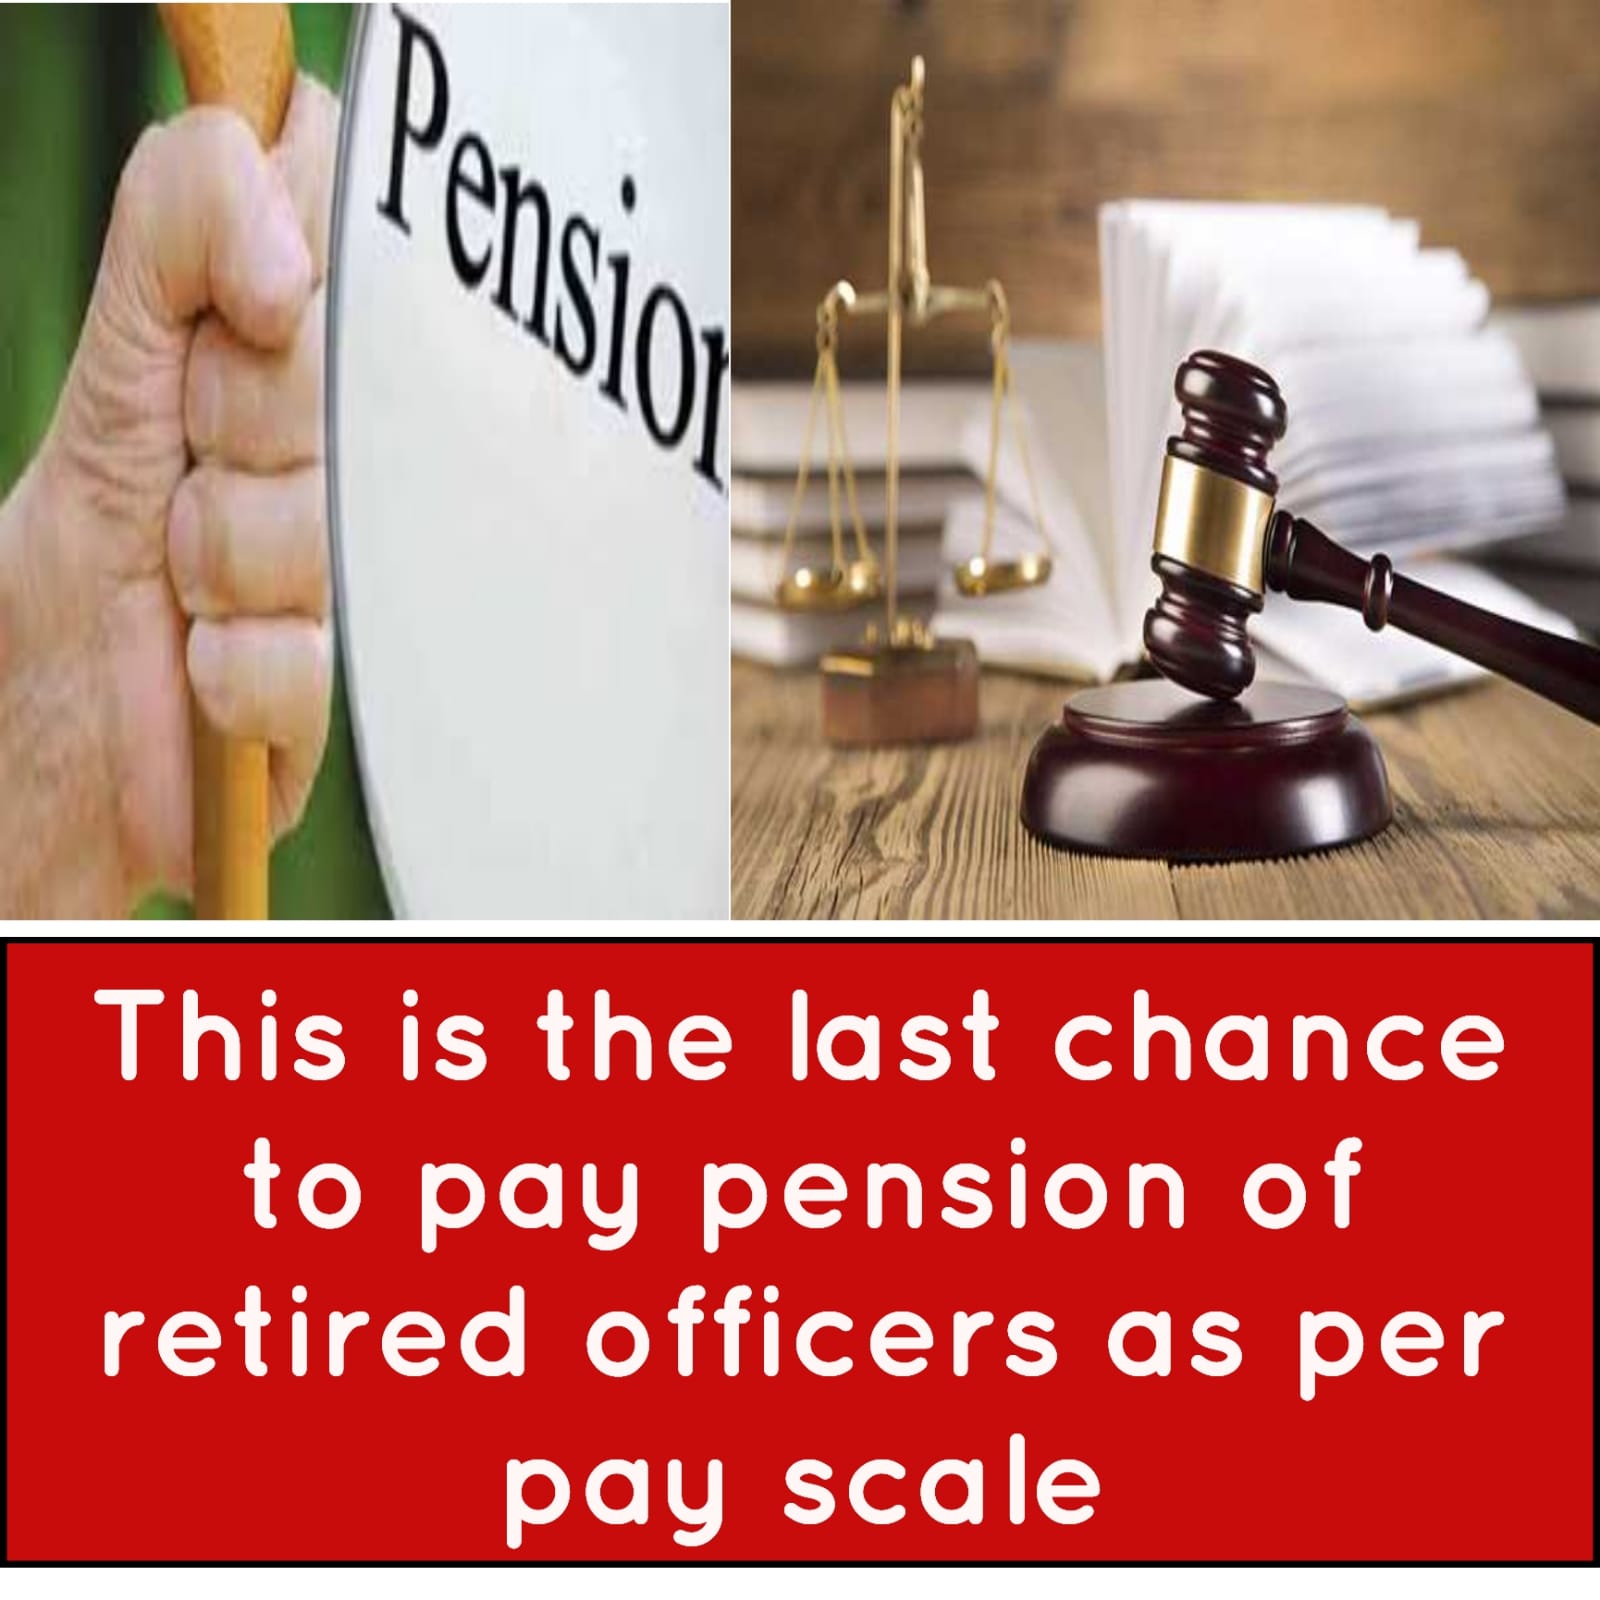 This is the last chance to pay pension of retired officers as per pay scale